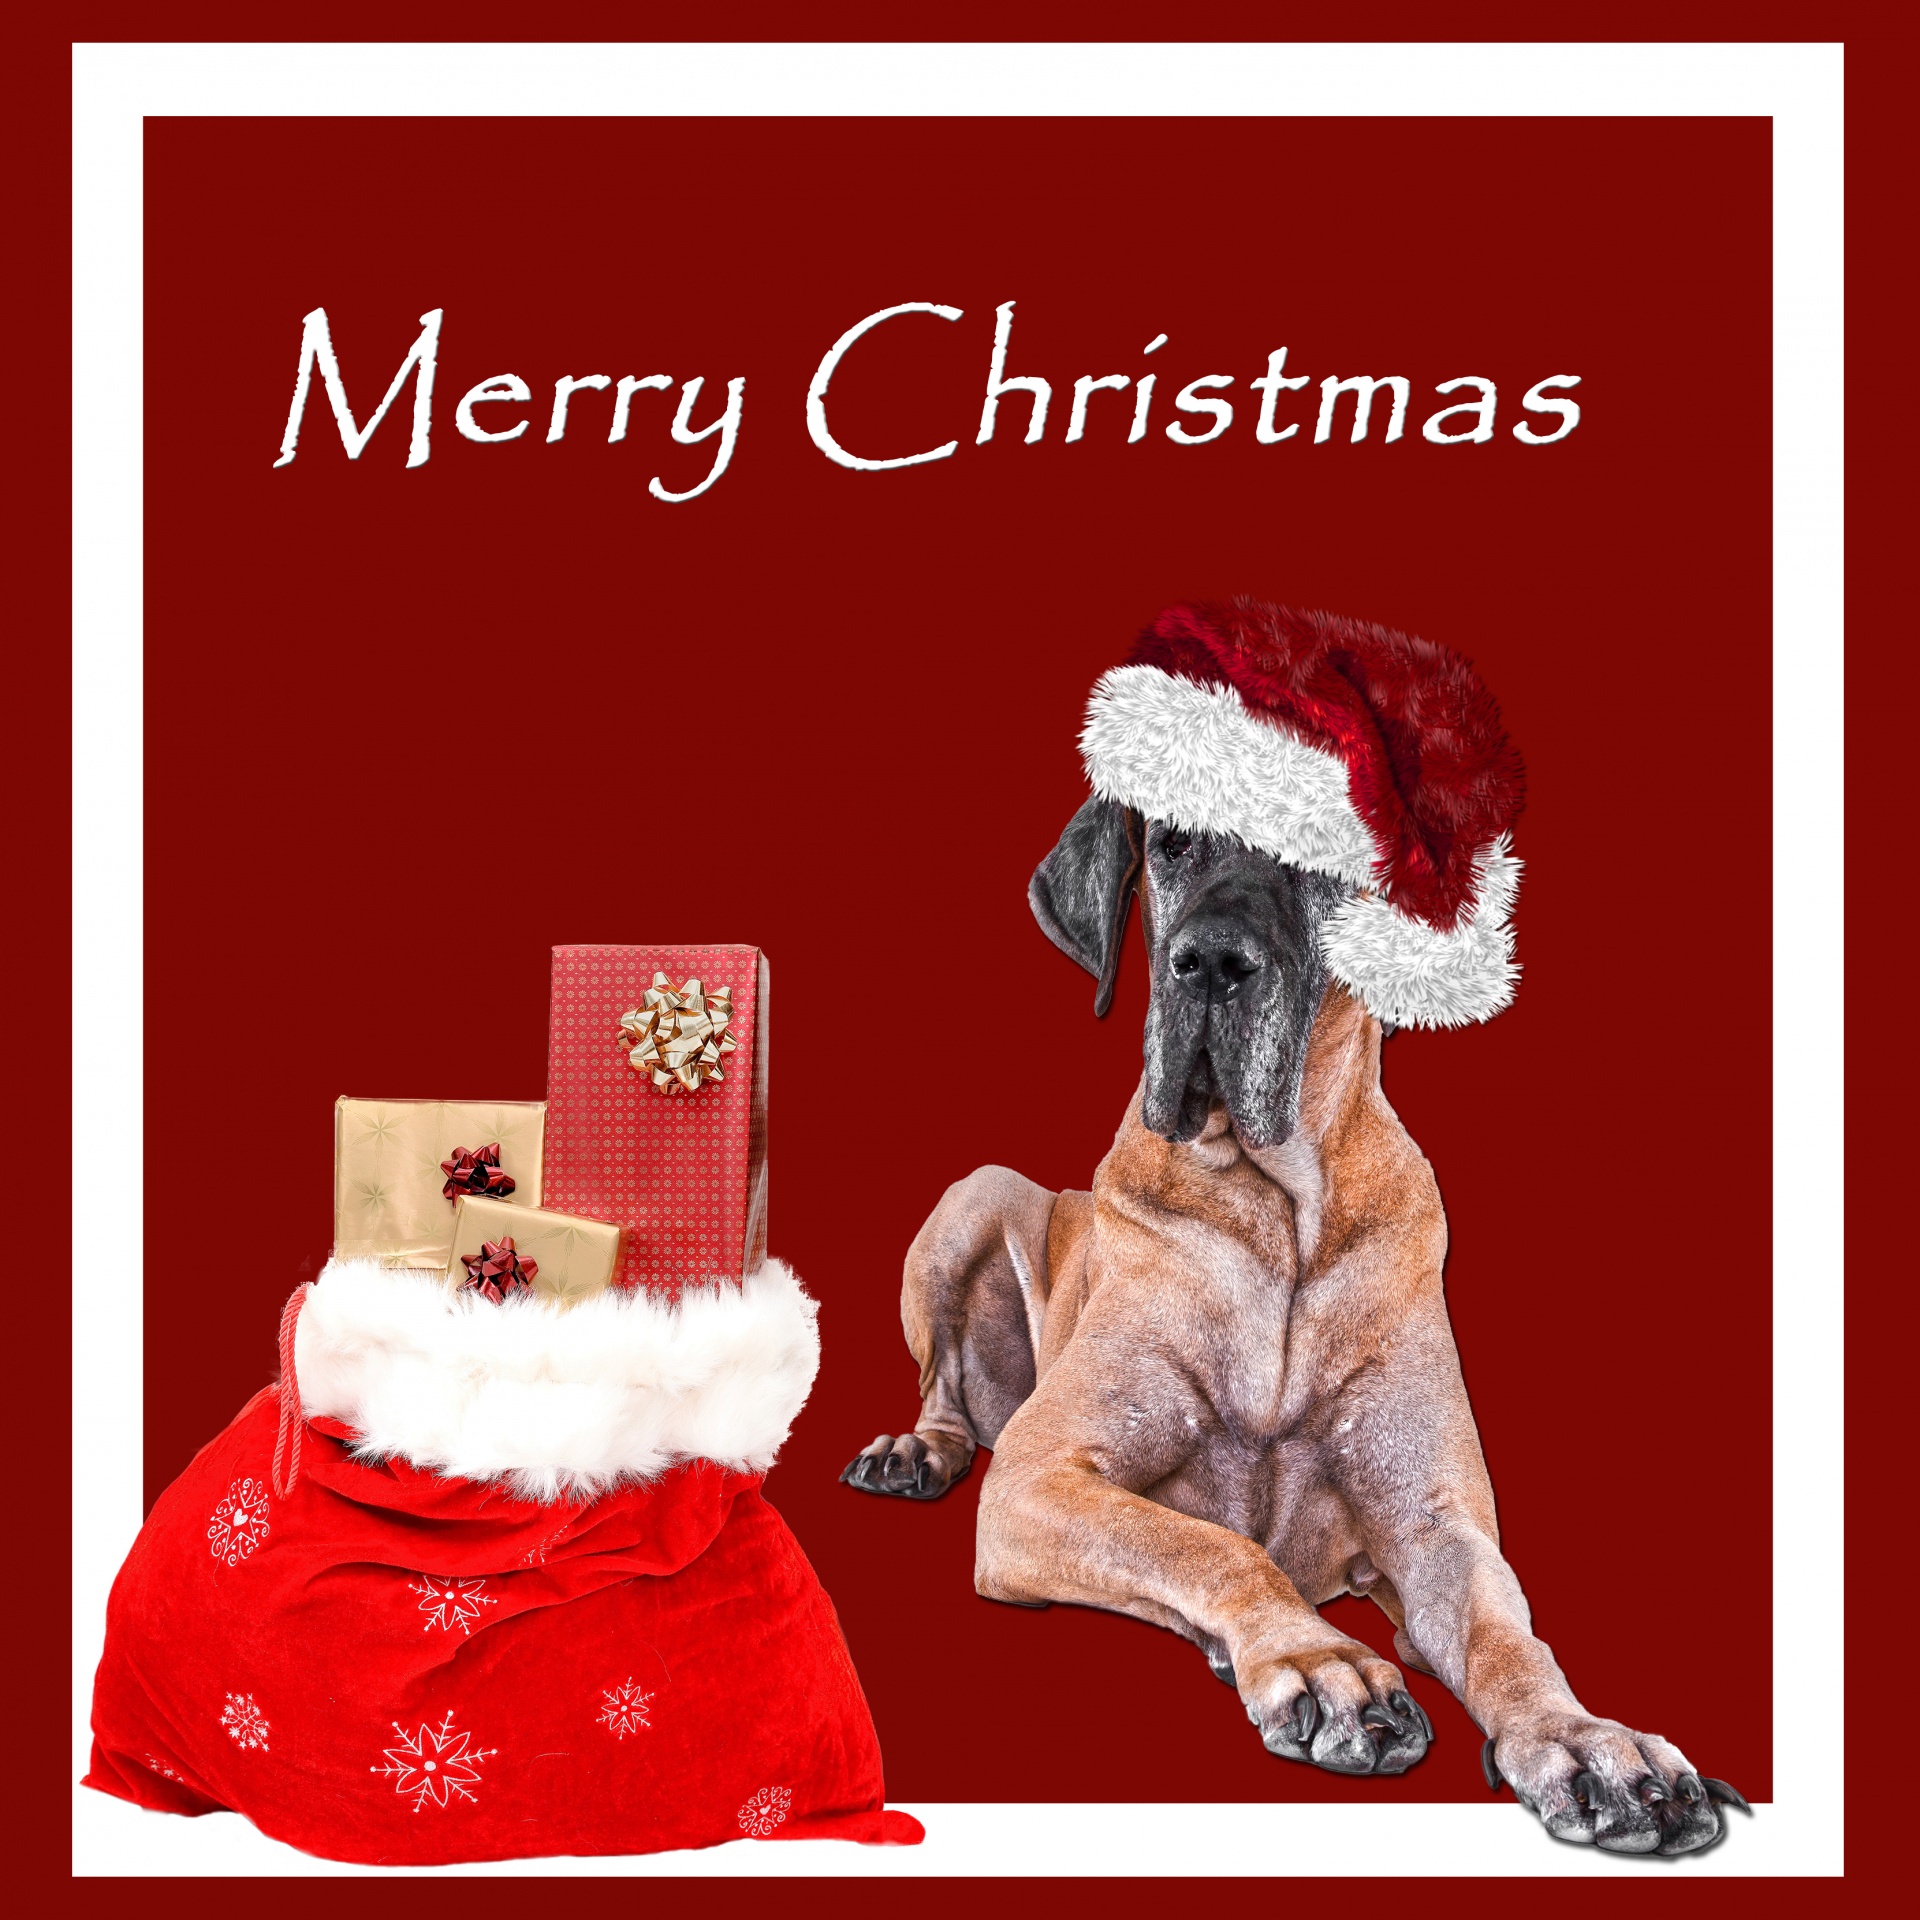 Great Dane dog in Christmas hat with sack of gifts card template